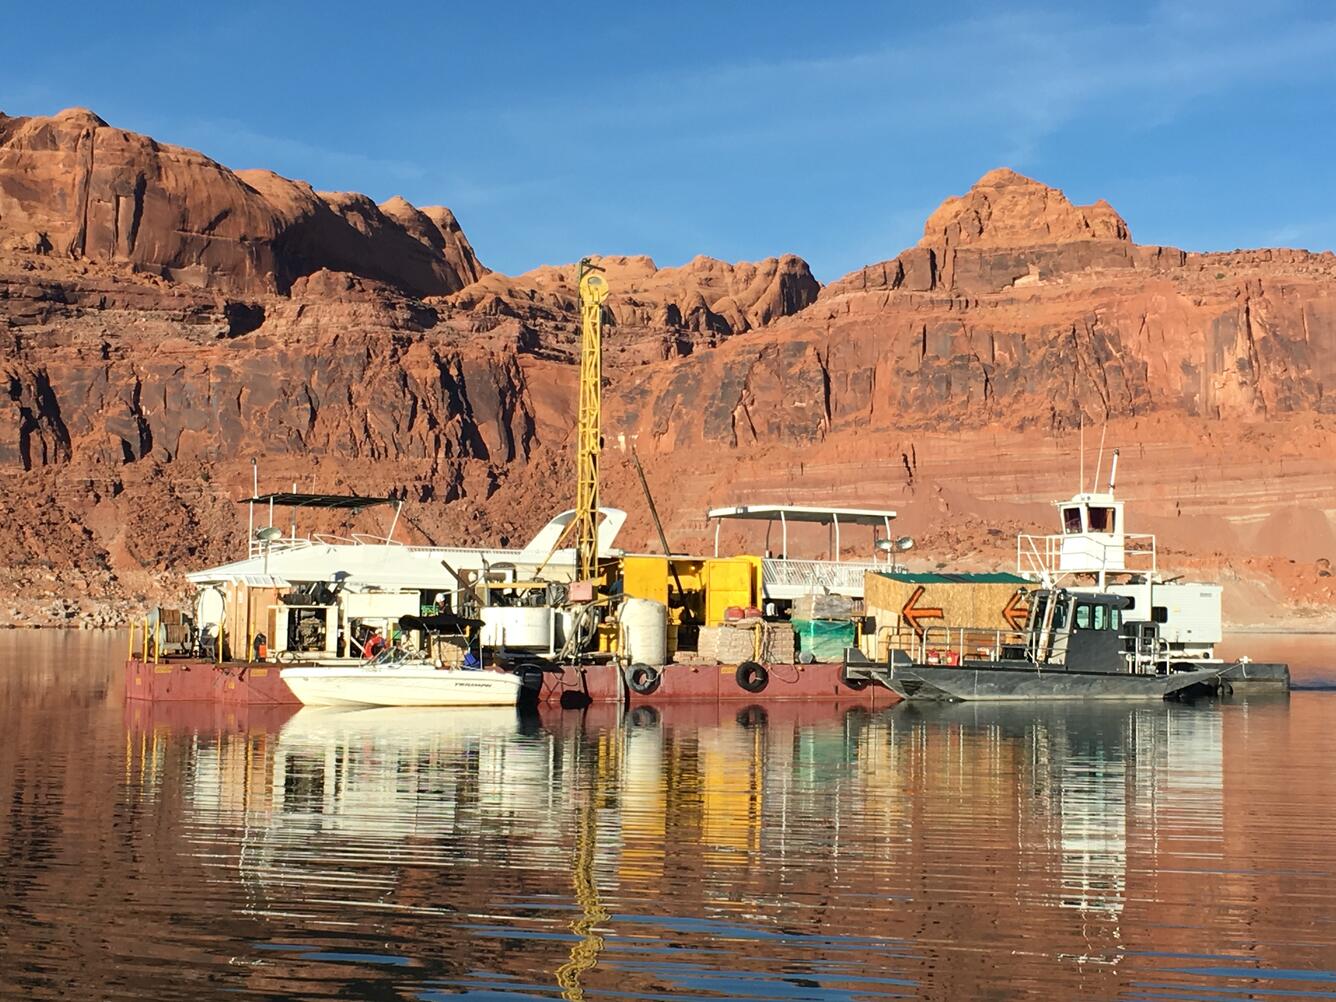 USGS scientists collect sediment cores from Lake Powell